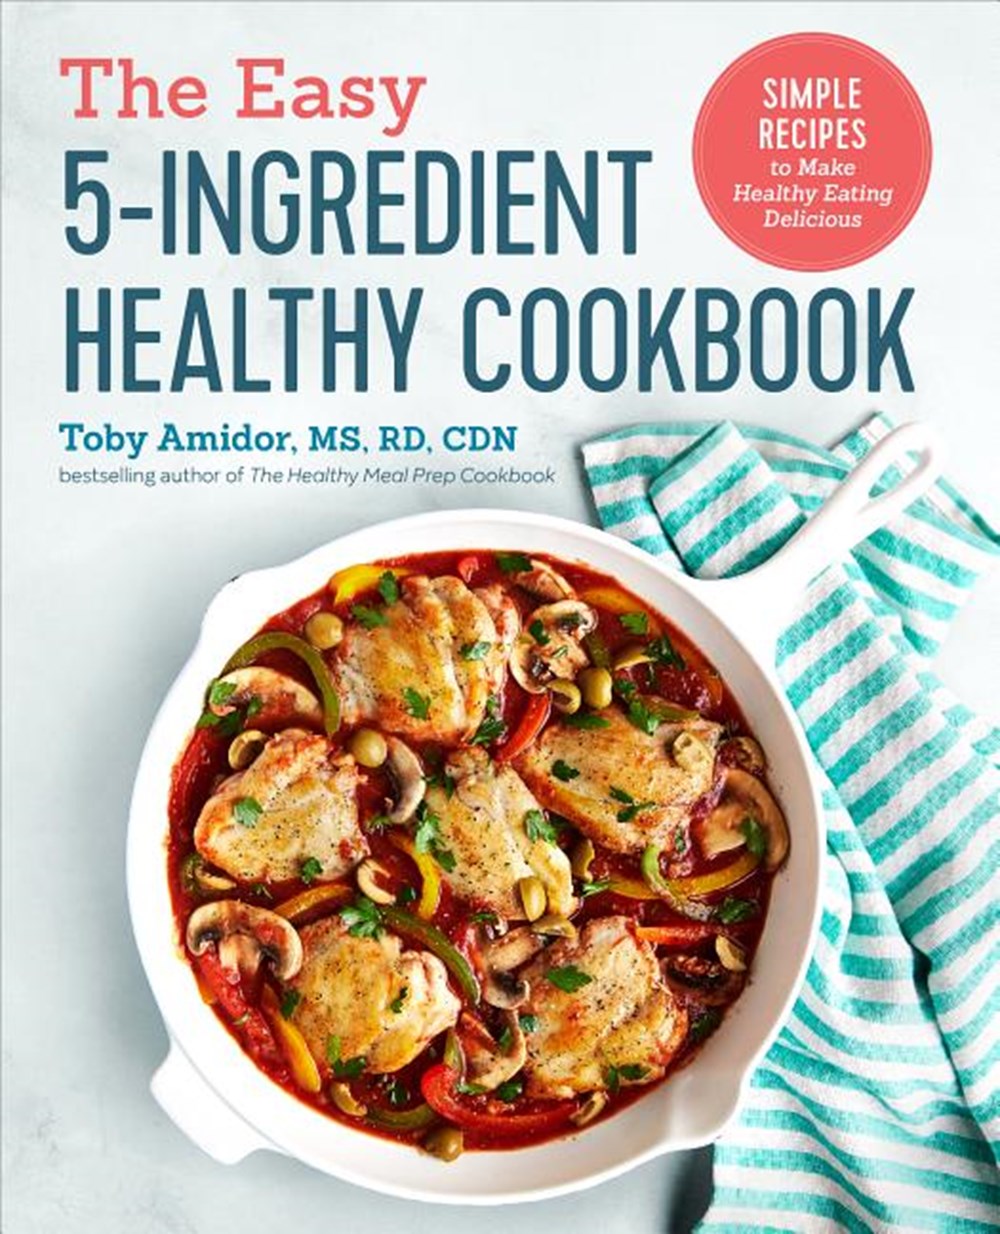 Easy 5-Ingredient Healthy Cookbook: Simple Recipes to Make Healthy Eating Delicious